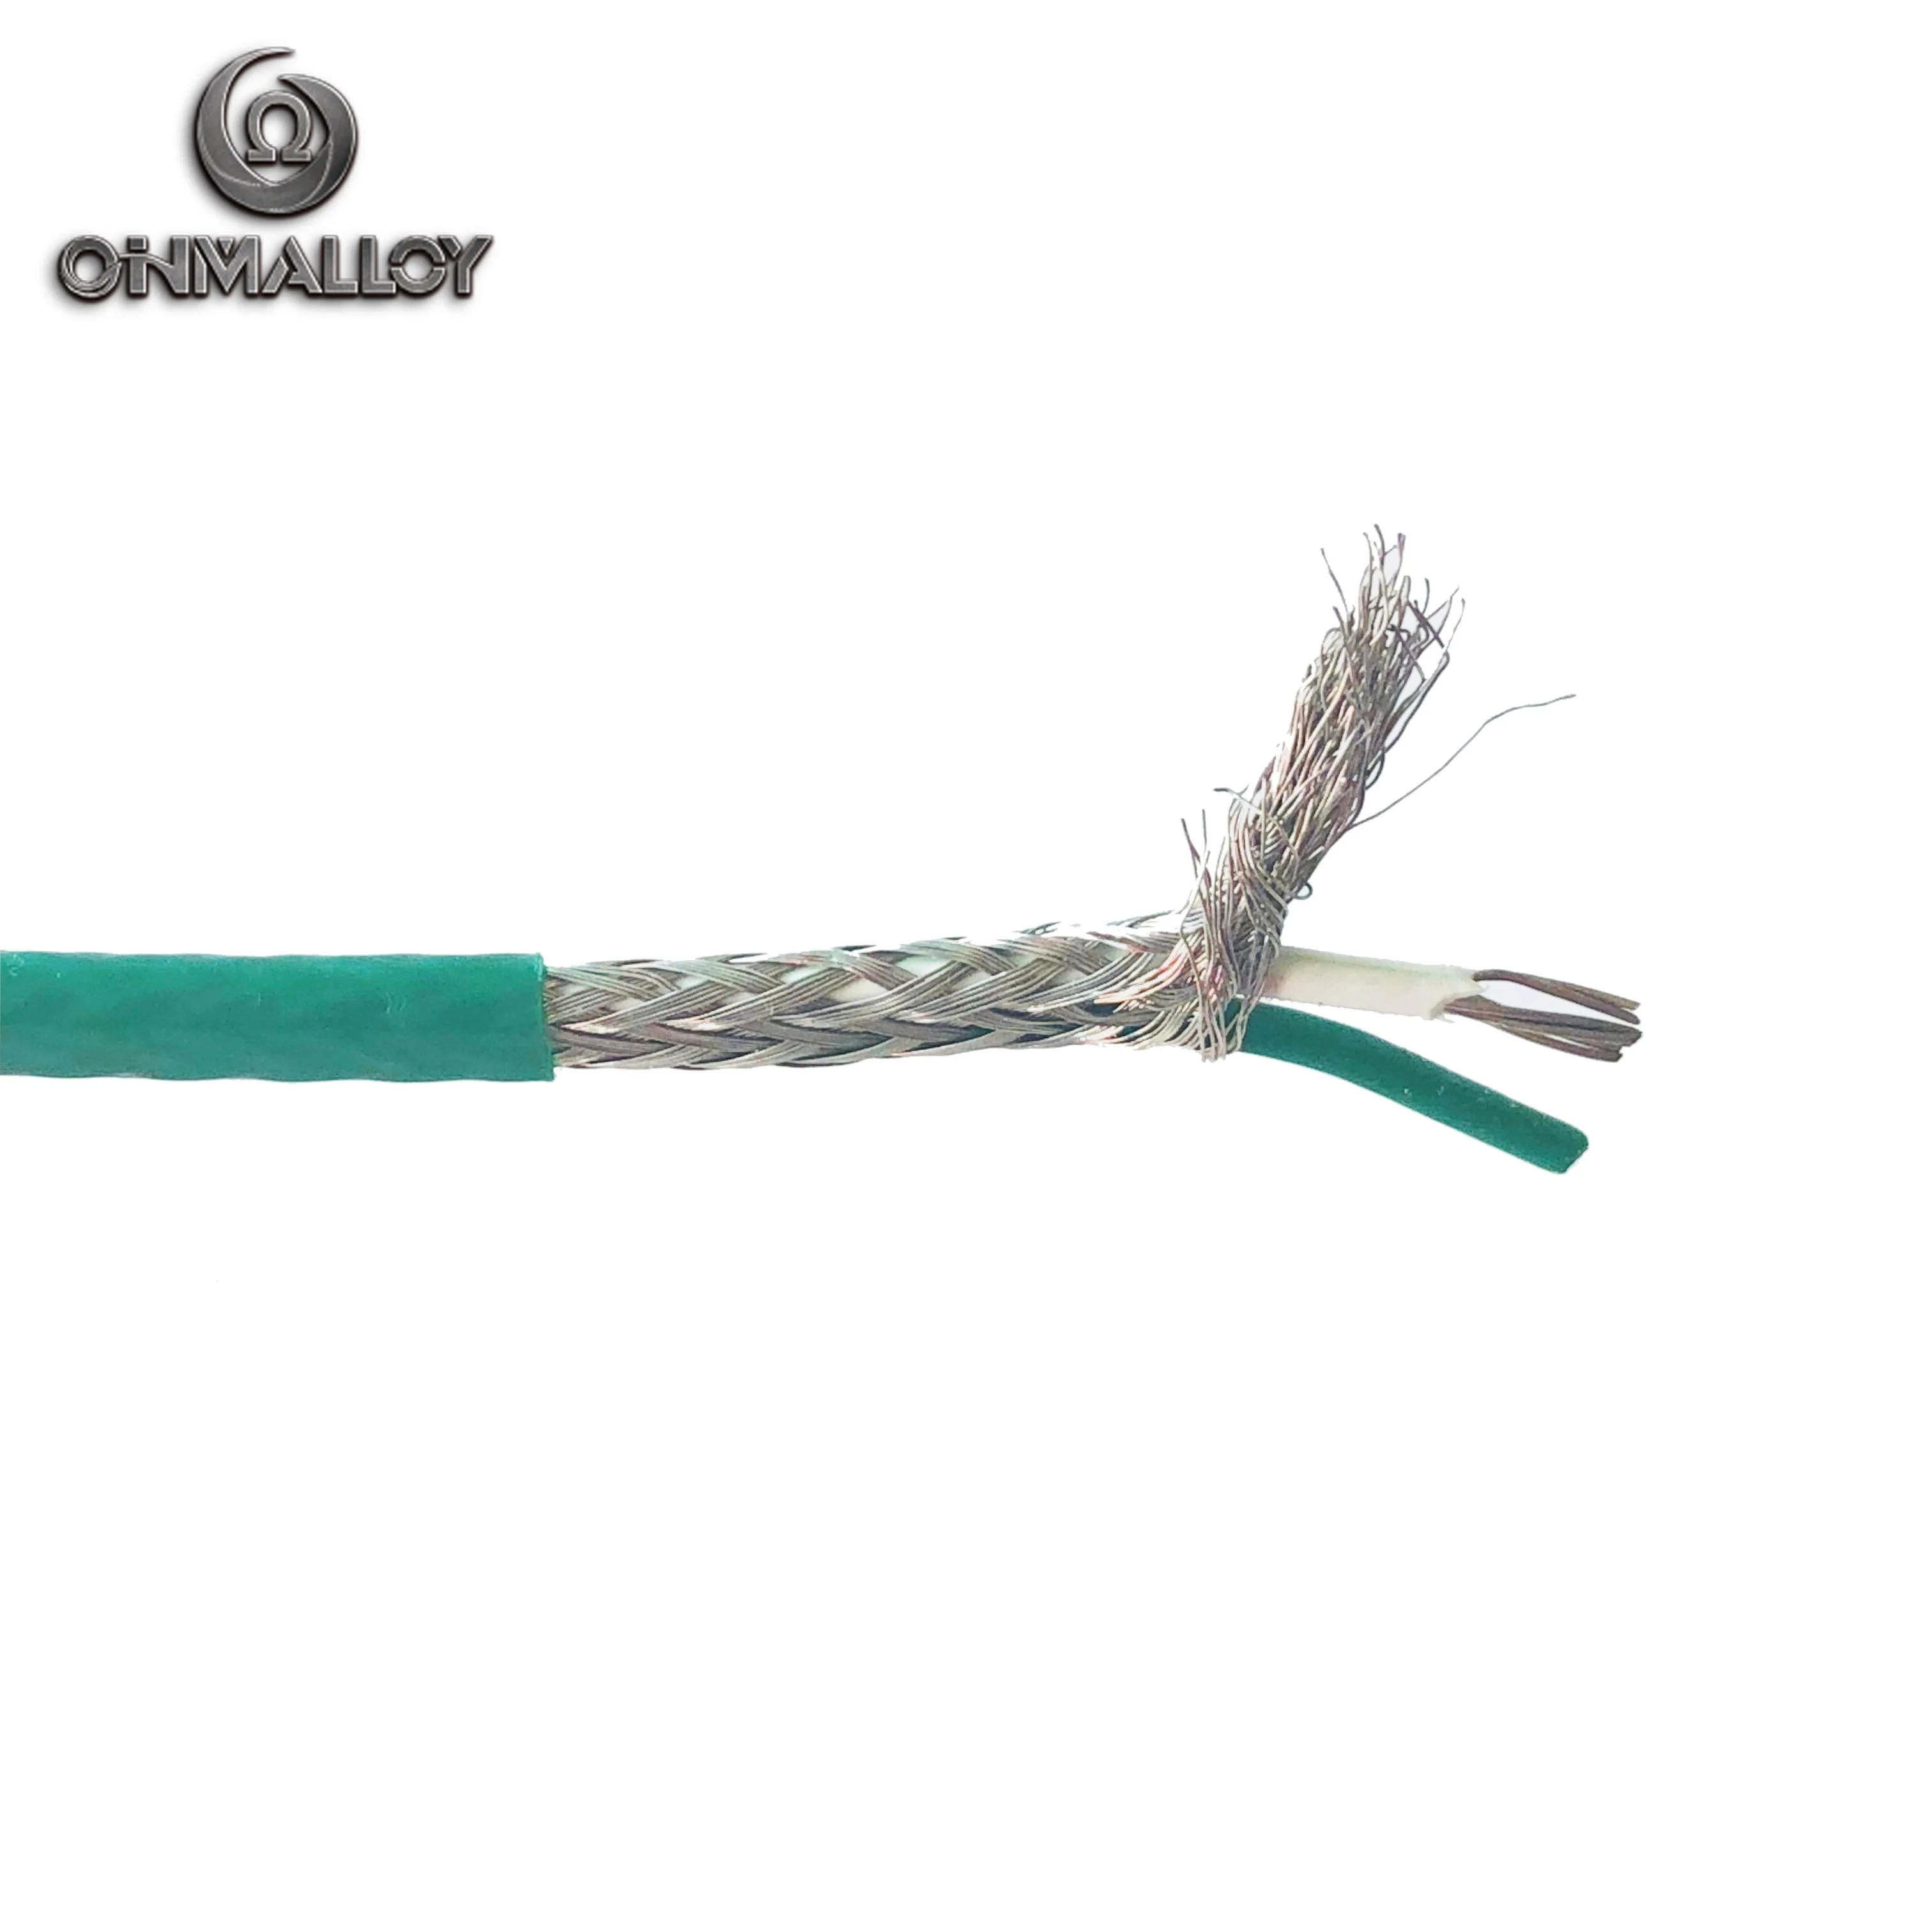 20AWG PTFE K Type Thermocouple Extension Cable